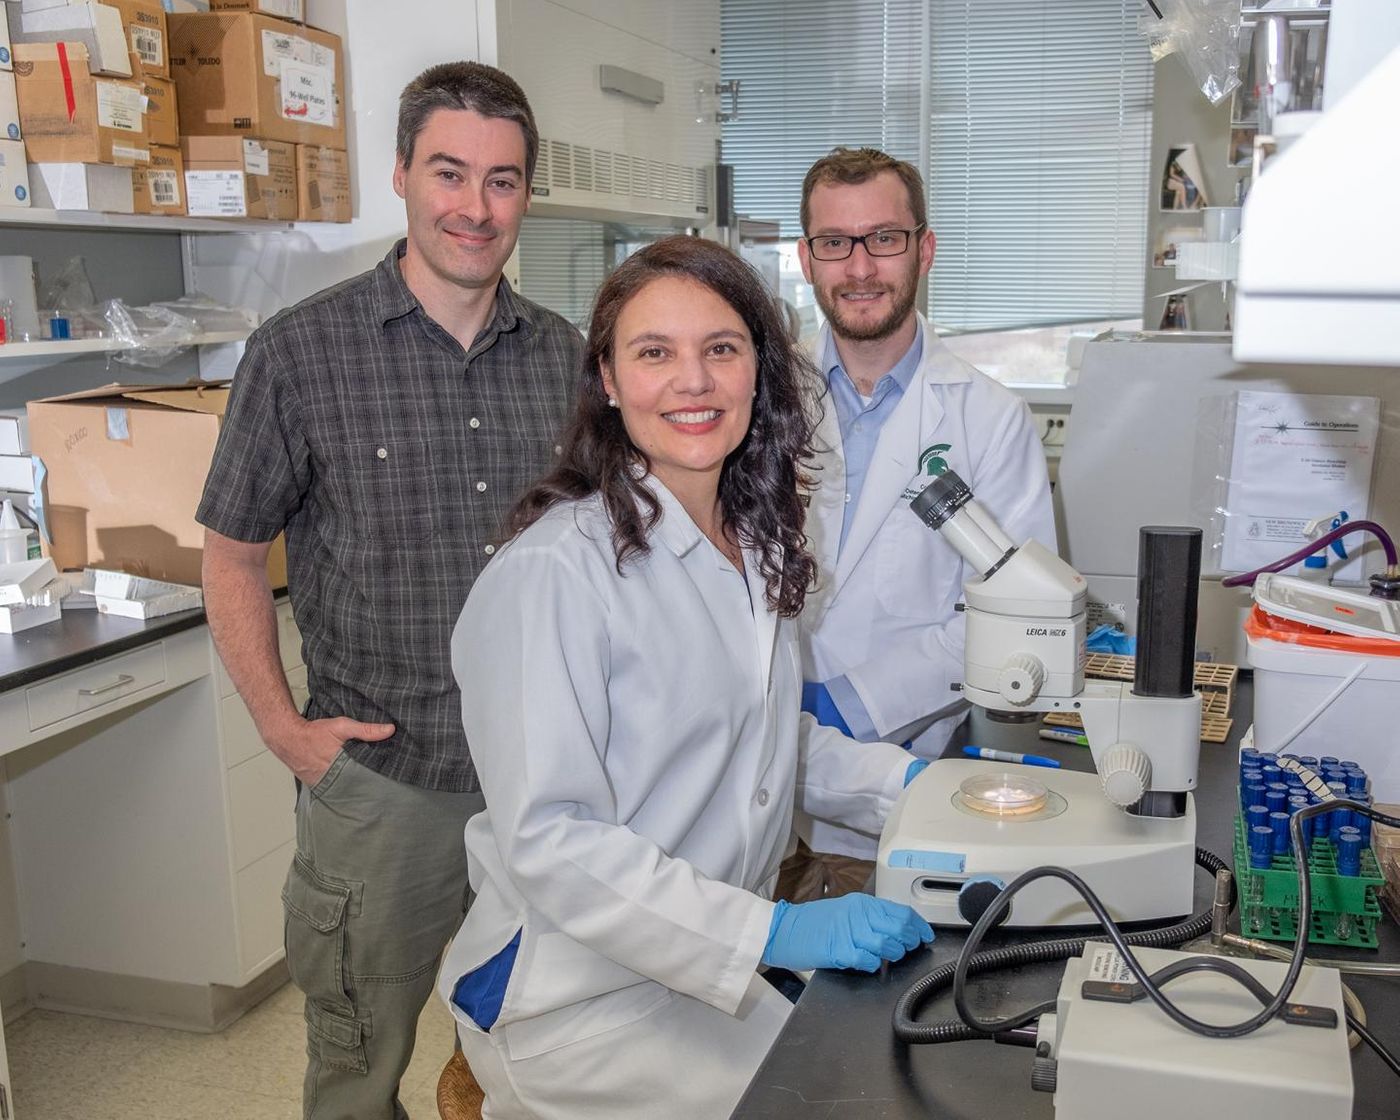 Michigan State University microbiology professor Chris Waters (pictured left), with research associates Micheal Maiden and Alessandra Hunt, have found that a common antibacterial substance found in toothpaste may combat life-threatening diseases such as cystic fibrosis when combined with the already FDA-approved antibiotic tobramycin. /Credit: Derrick Turner